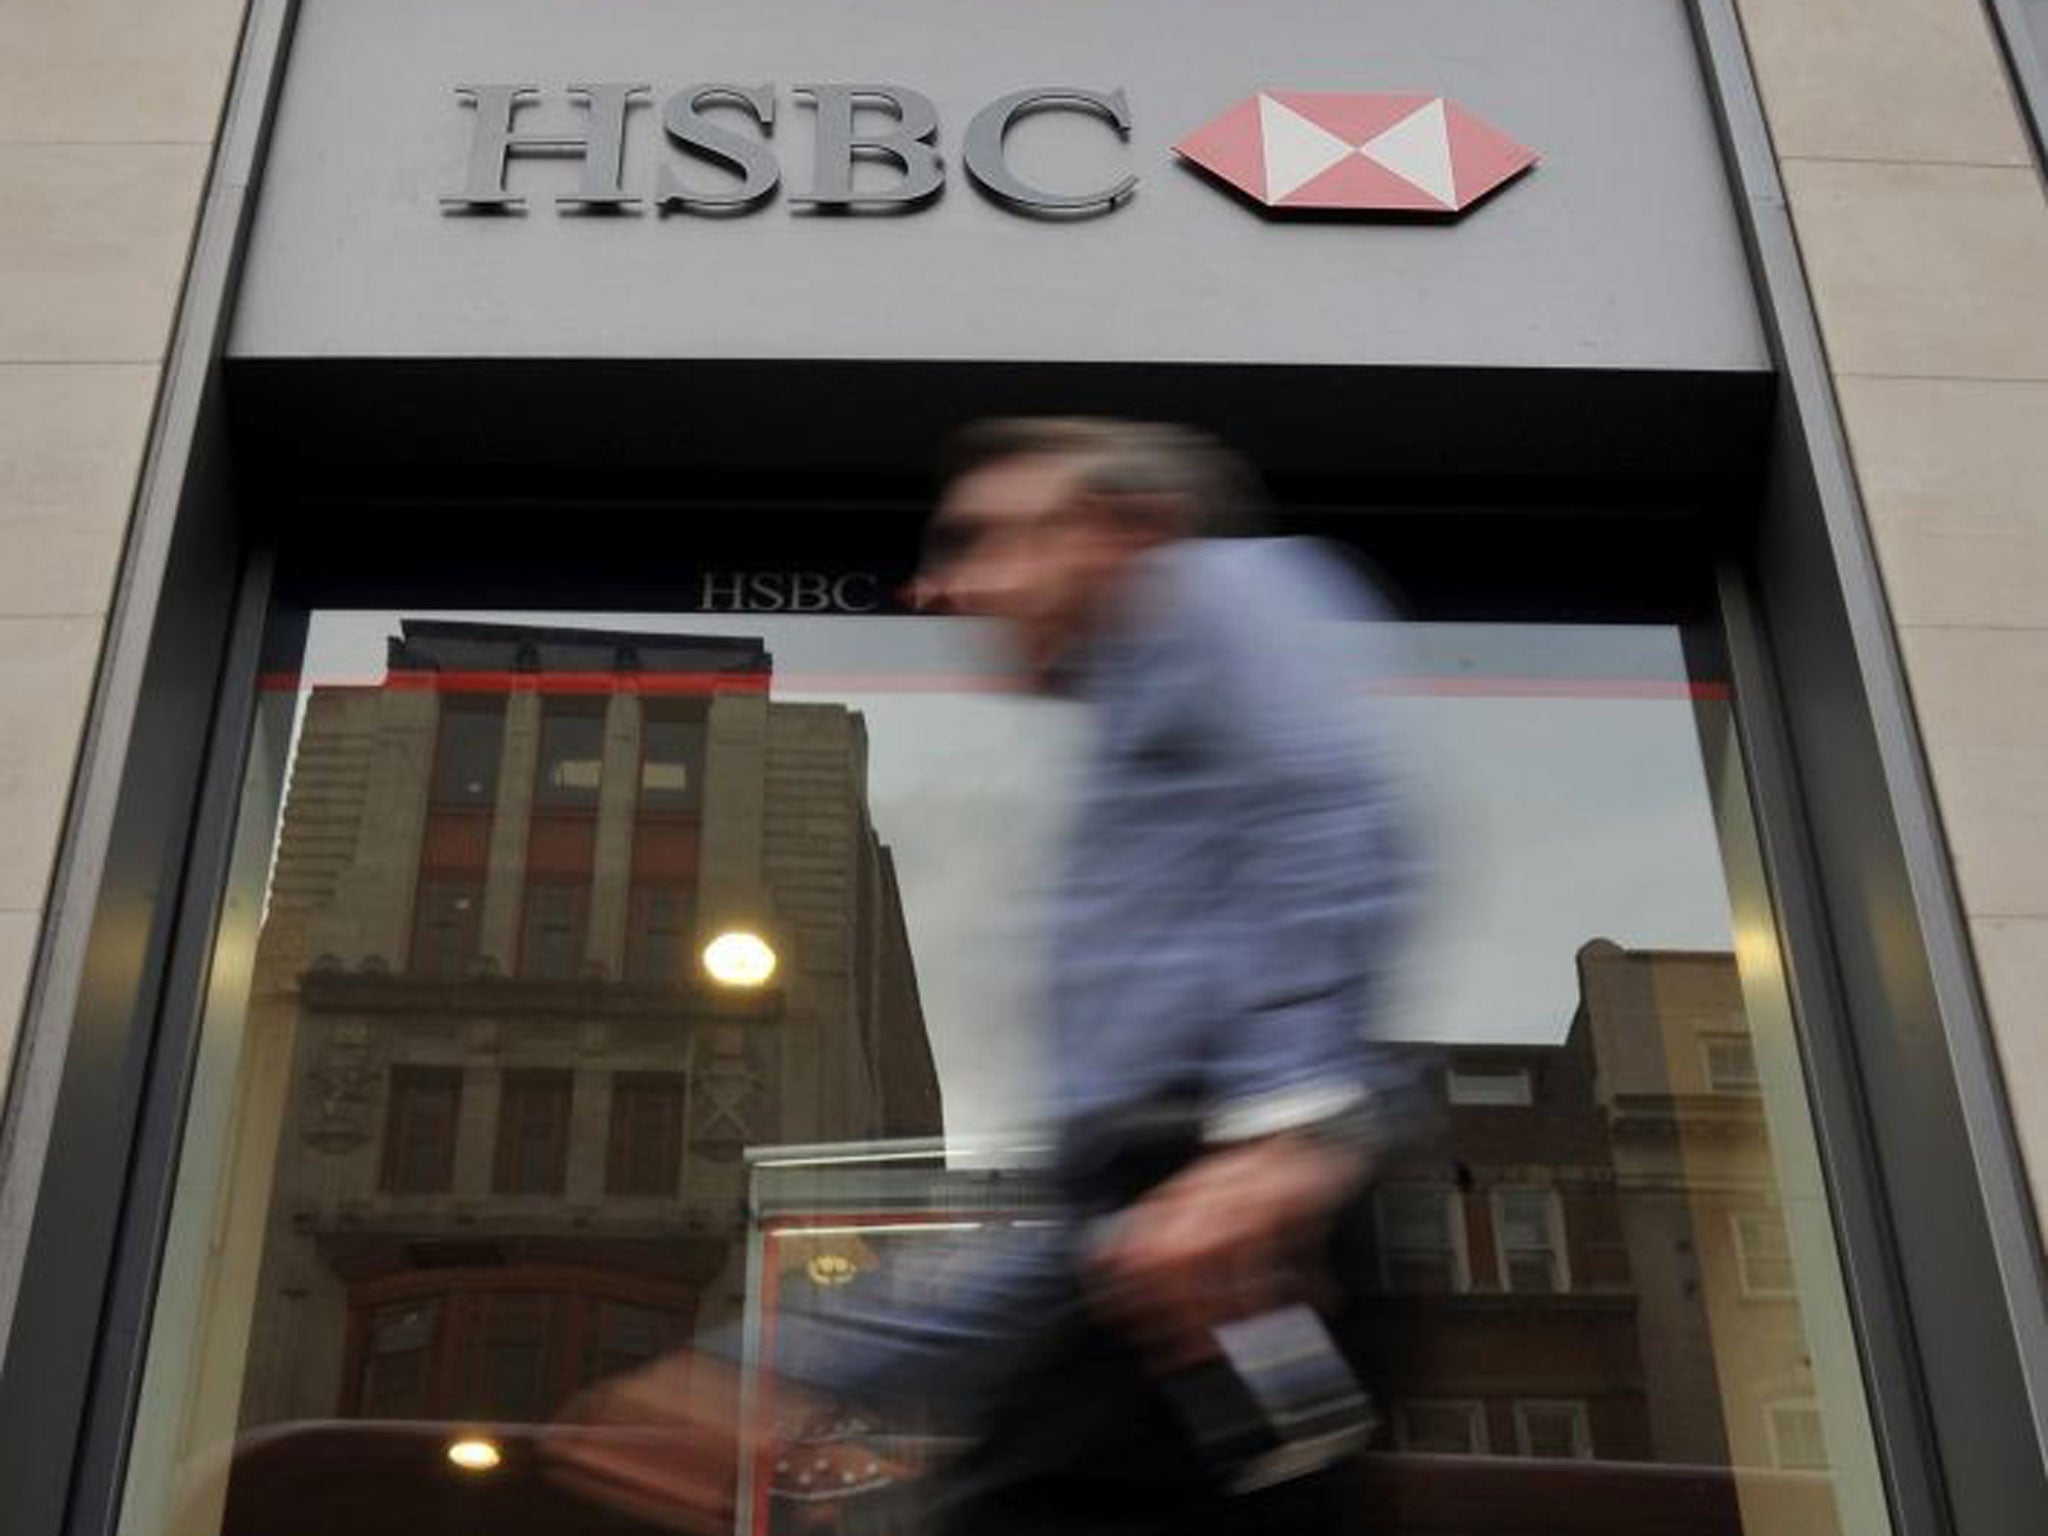 Shares in HSBC soared close to 10 per cent in a matter of minutes in early trading